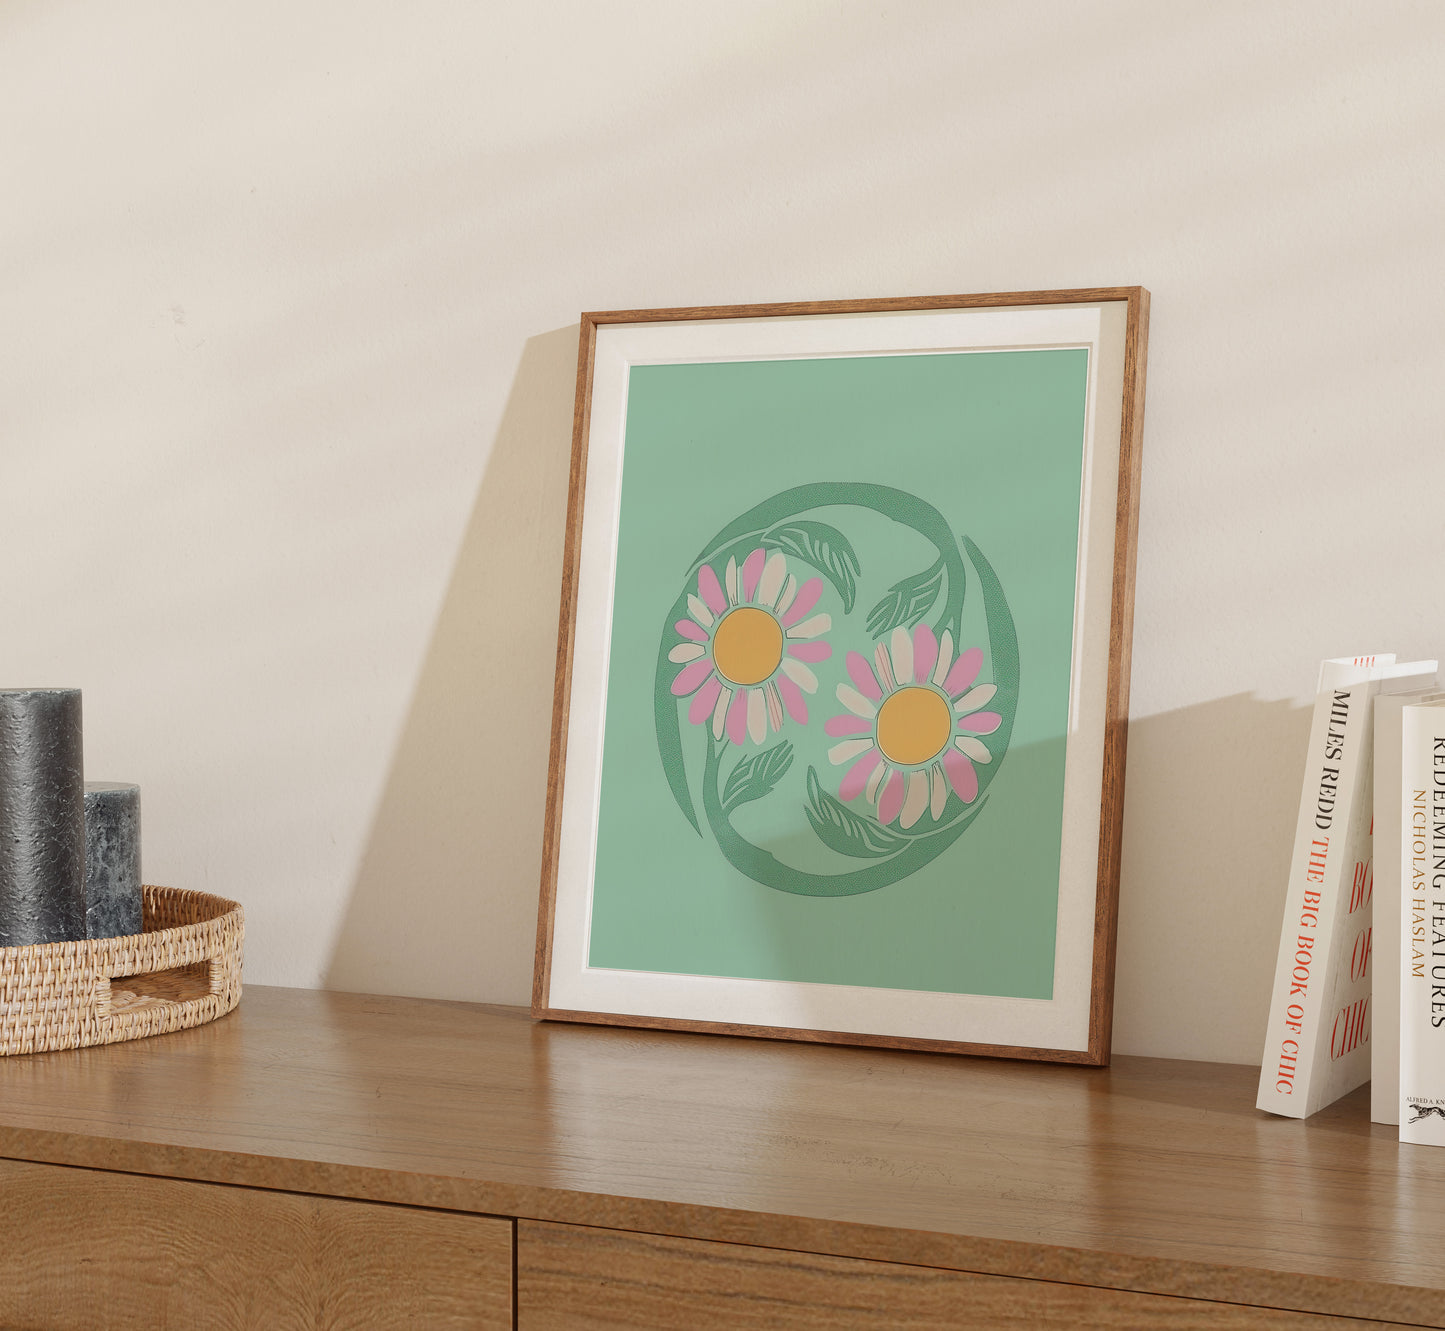 Framed floral print on a desk next to books and a basket.